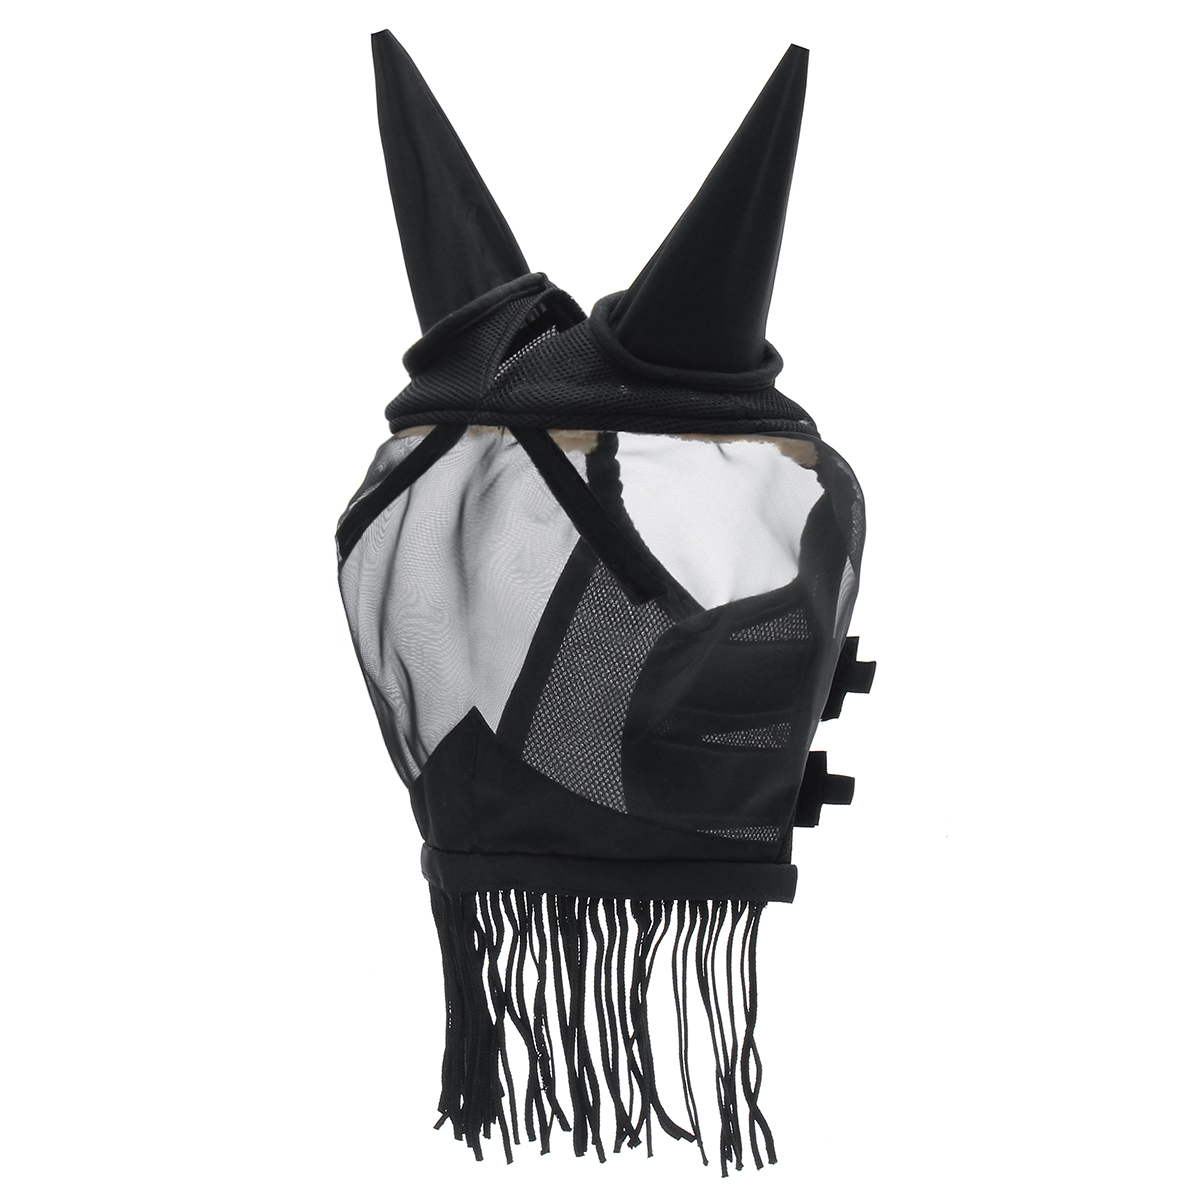 Mesh-Horse-Full-Face-Mosquito-Protector-Fly-Mask-With-Ears-Cover-Breathable-Equestrian-Supplies-1358897